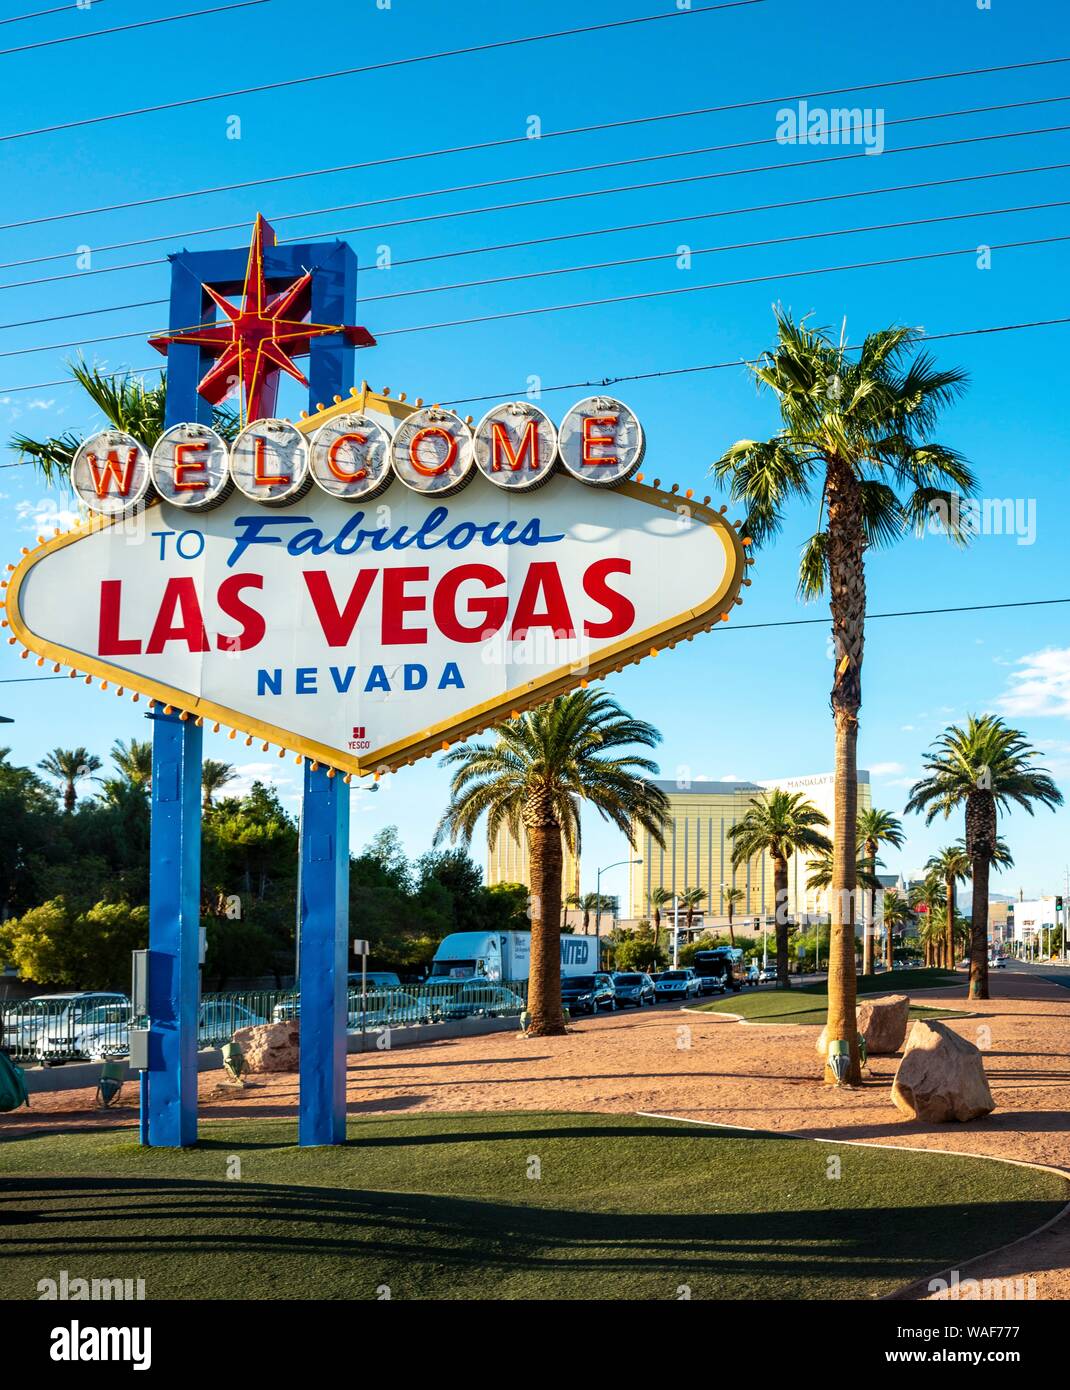 Welcome to Fabulous Las Vegas, front of the Las Vegas Welcome sign, Las Vegas Strip, Las Vegas, Nevada, USA Stock Photo